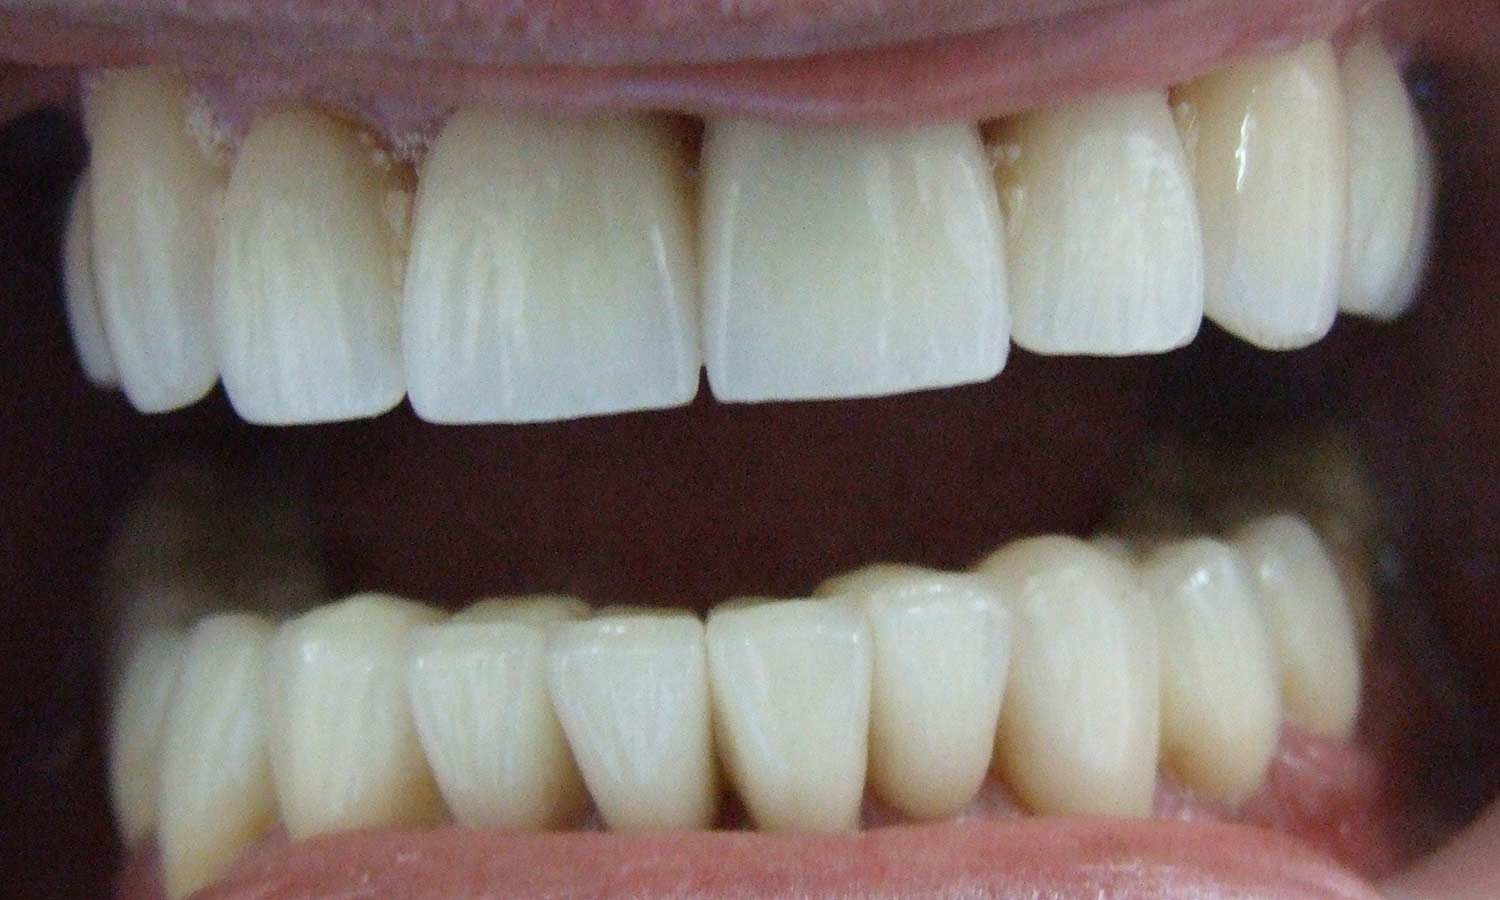 severely worn teeth after treatment